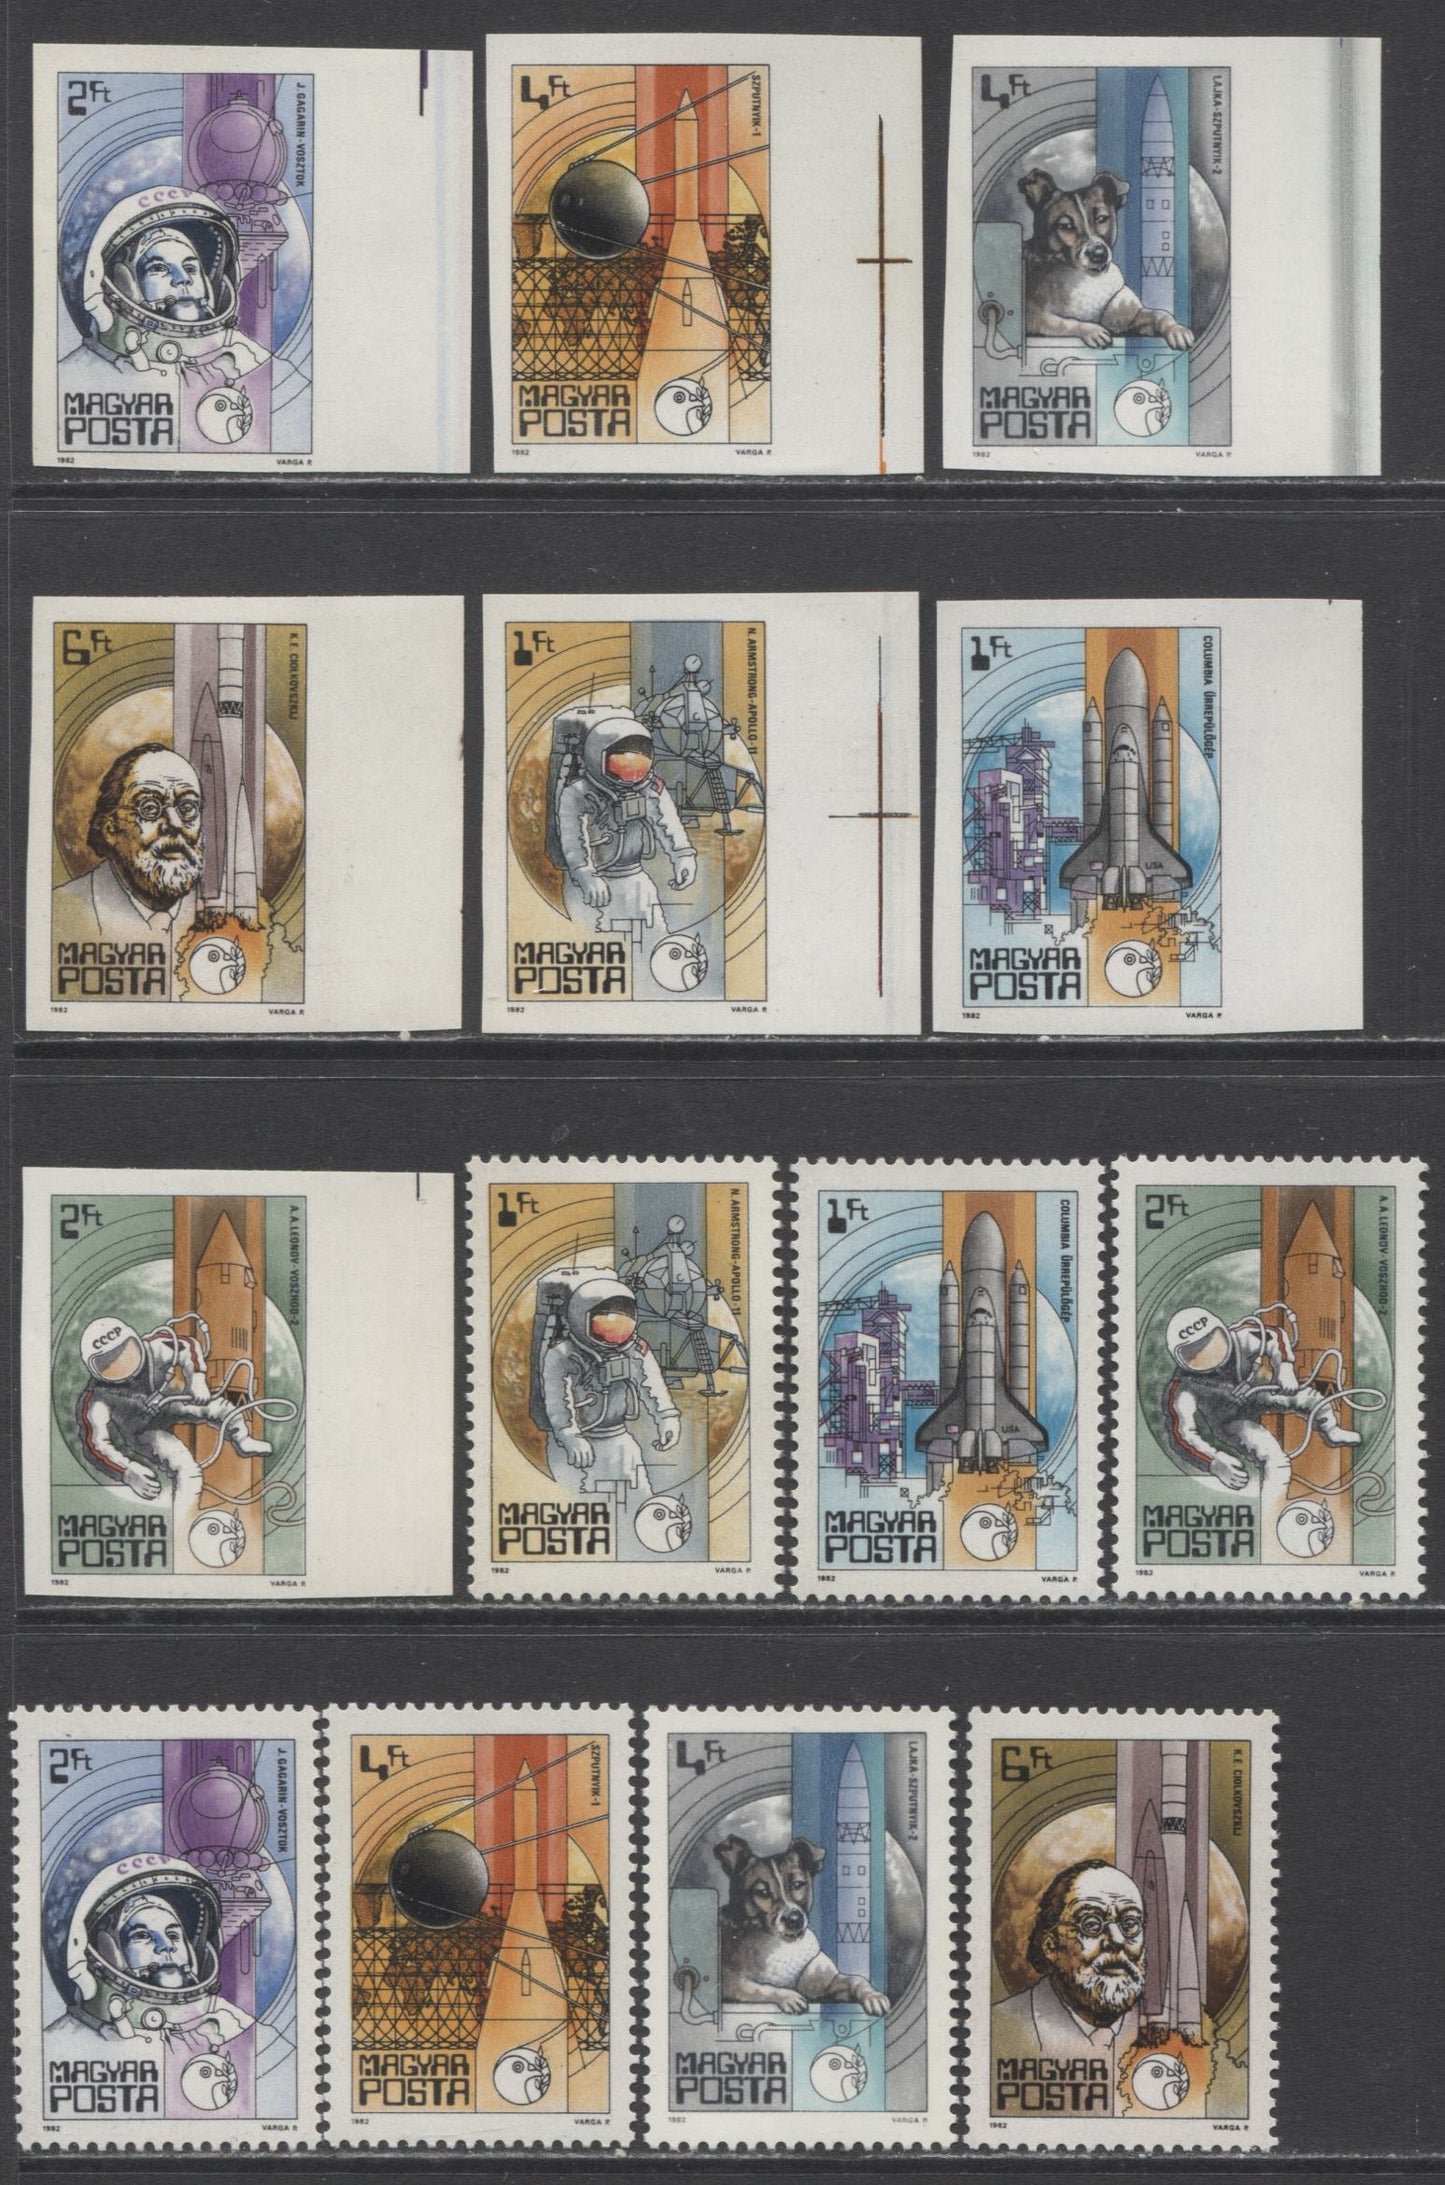 Lot 125 Hungary SC#2735-2741 1982 25 Years Of Space Travel Issue, Perf and Imperf, A VFNH Range Of Perf/Imperf Singles, 2017 Scott Cat. $20.5 USD, Click on Listing to See ALL Pictures